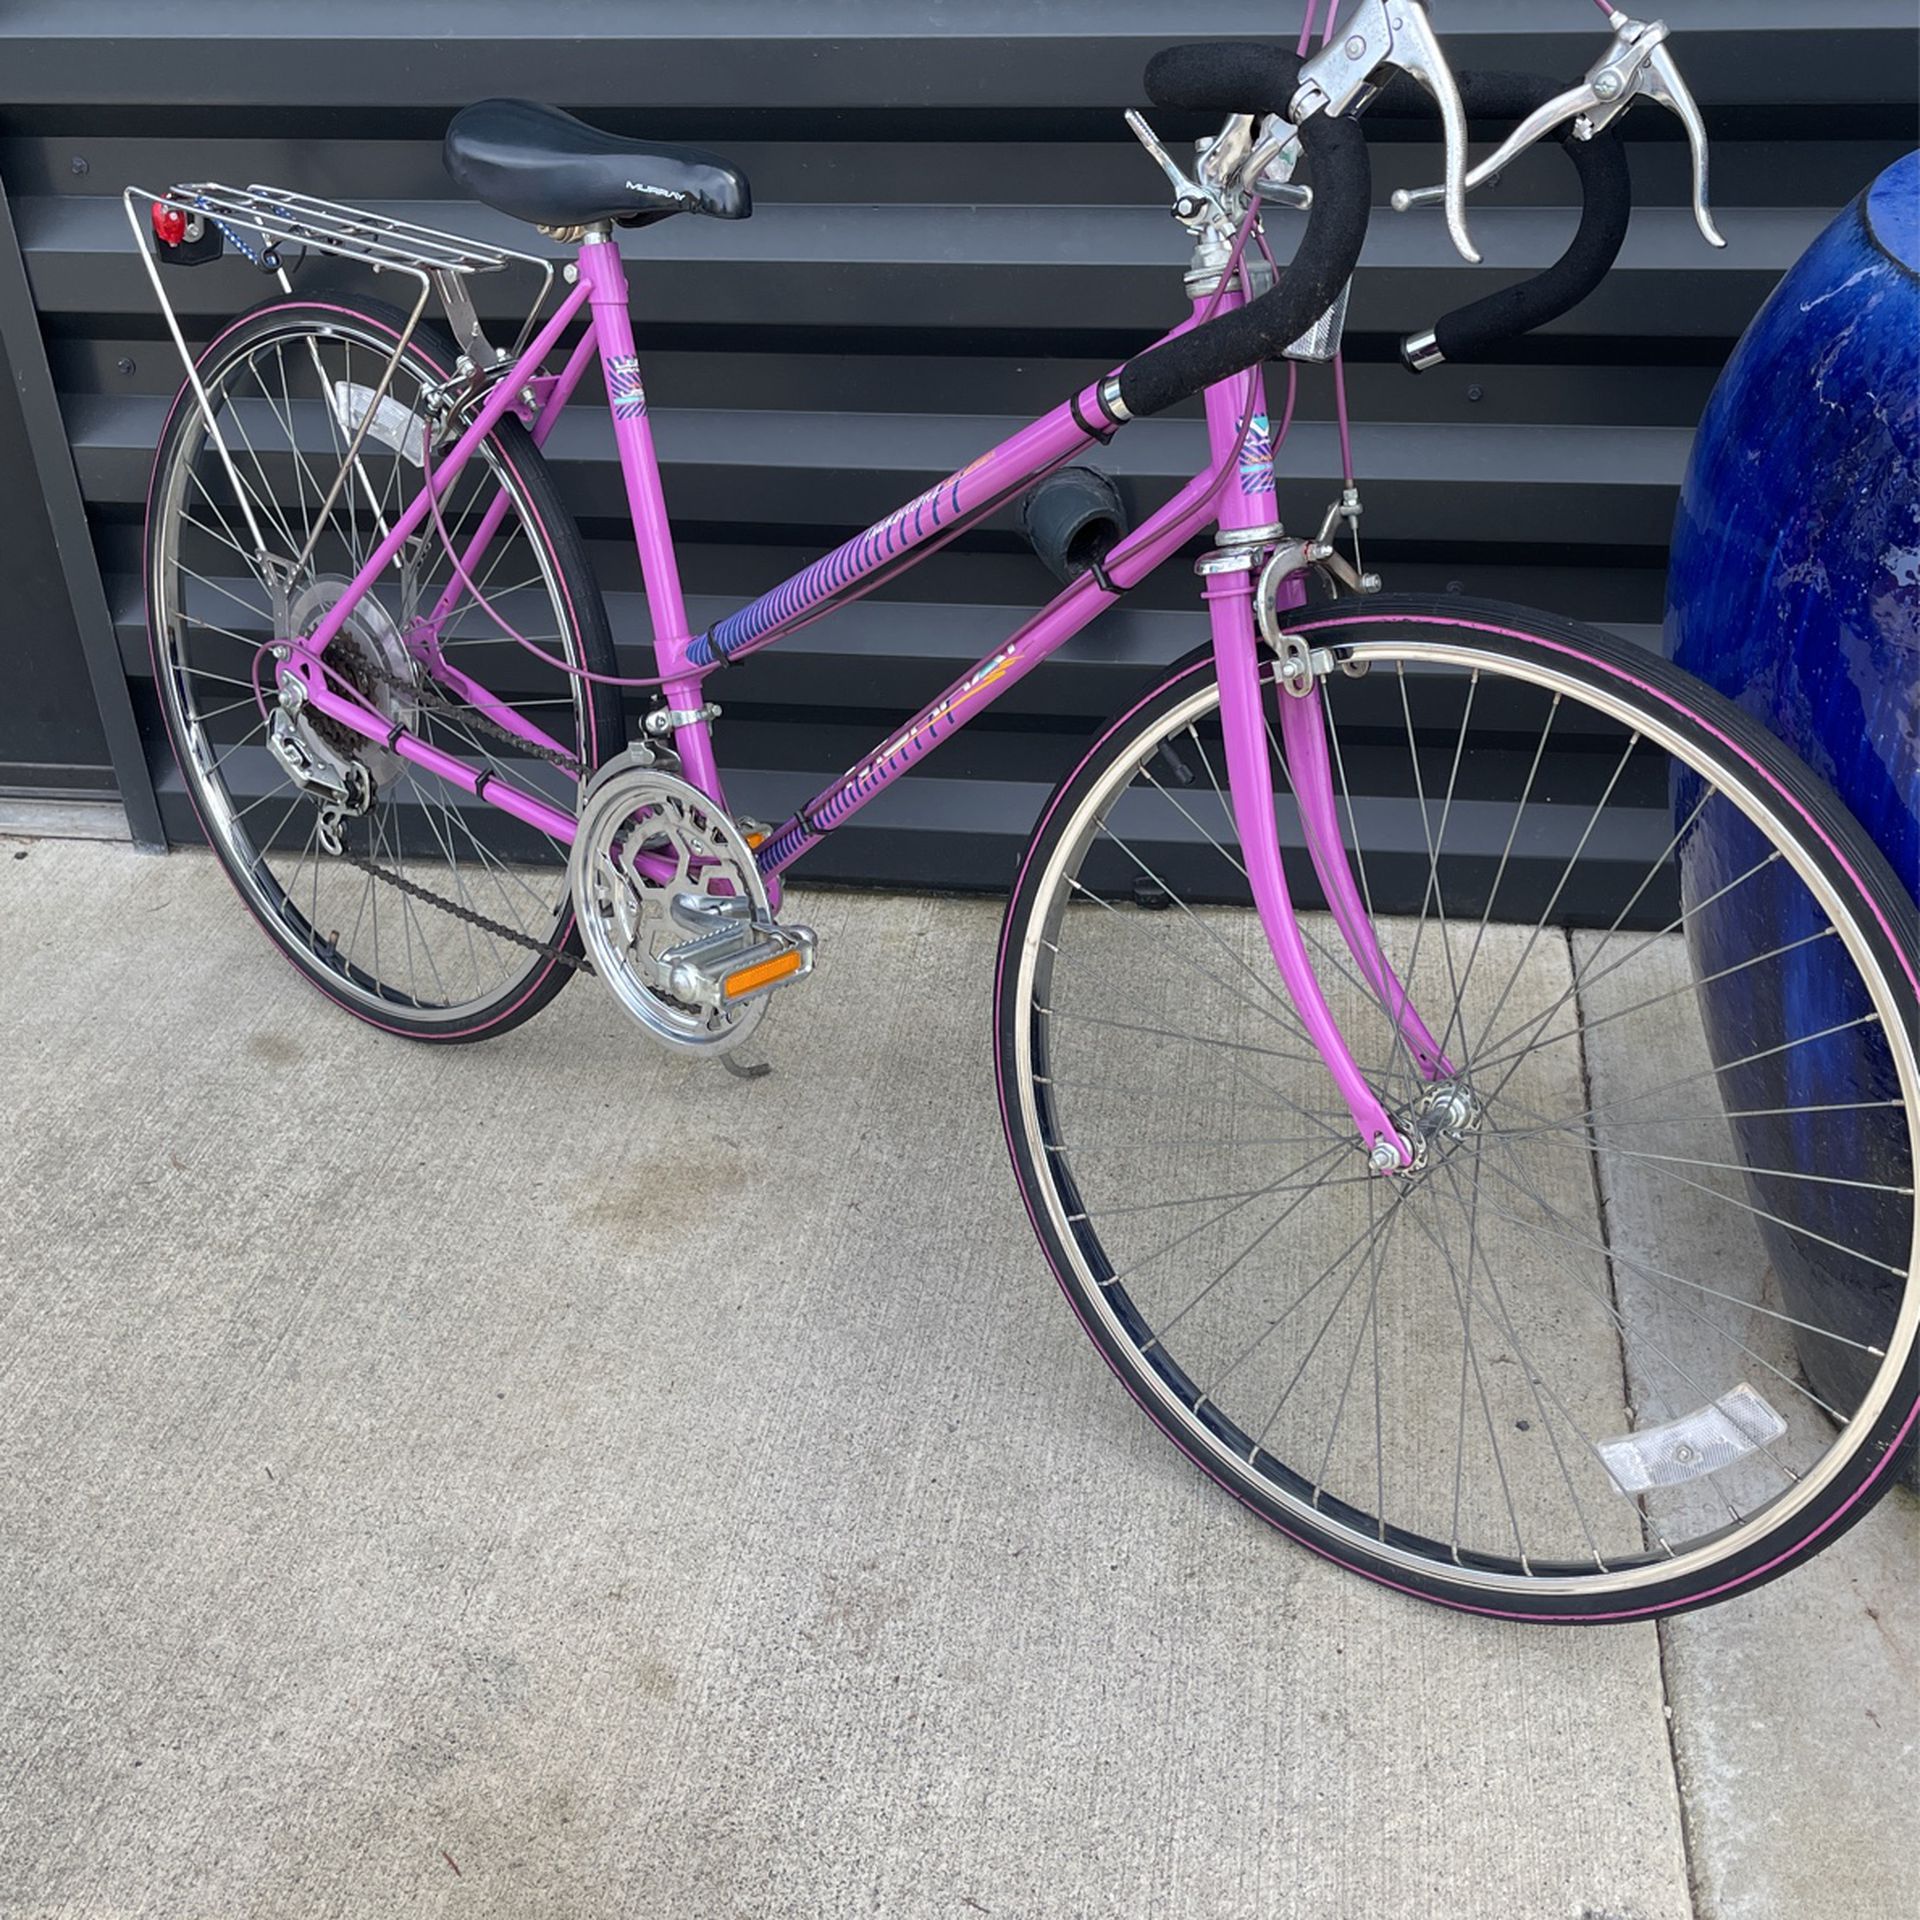 Girls Women’s 10 Speed Bicycle Barbie Pink Original In Beautiful Condition From 1980S